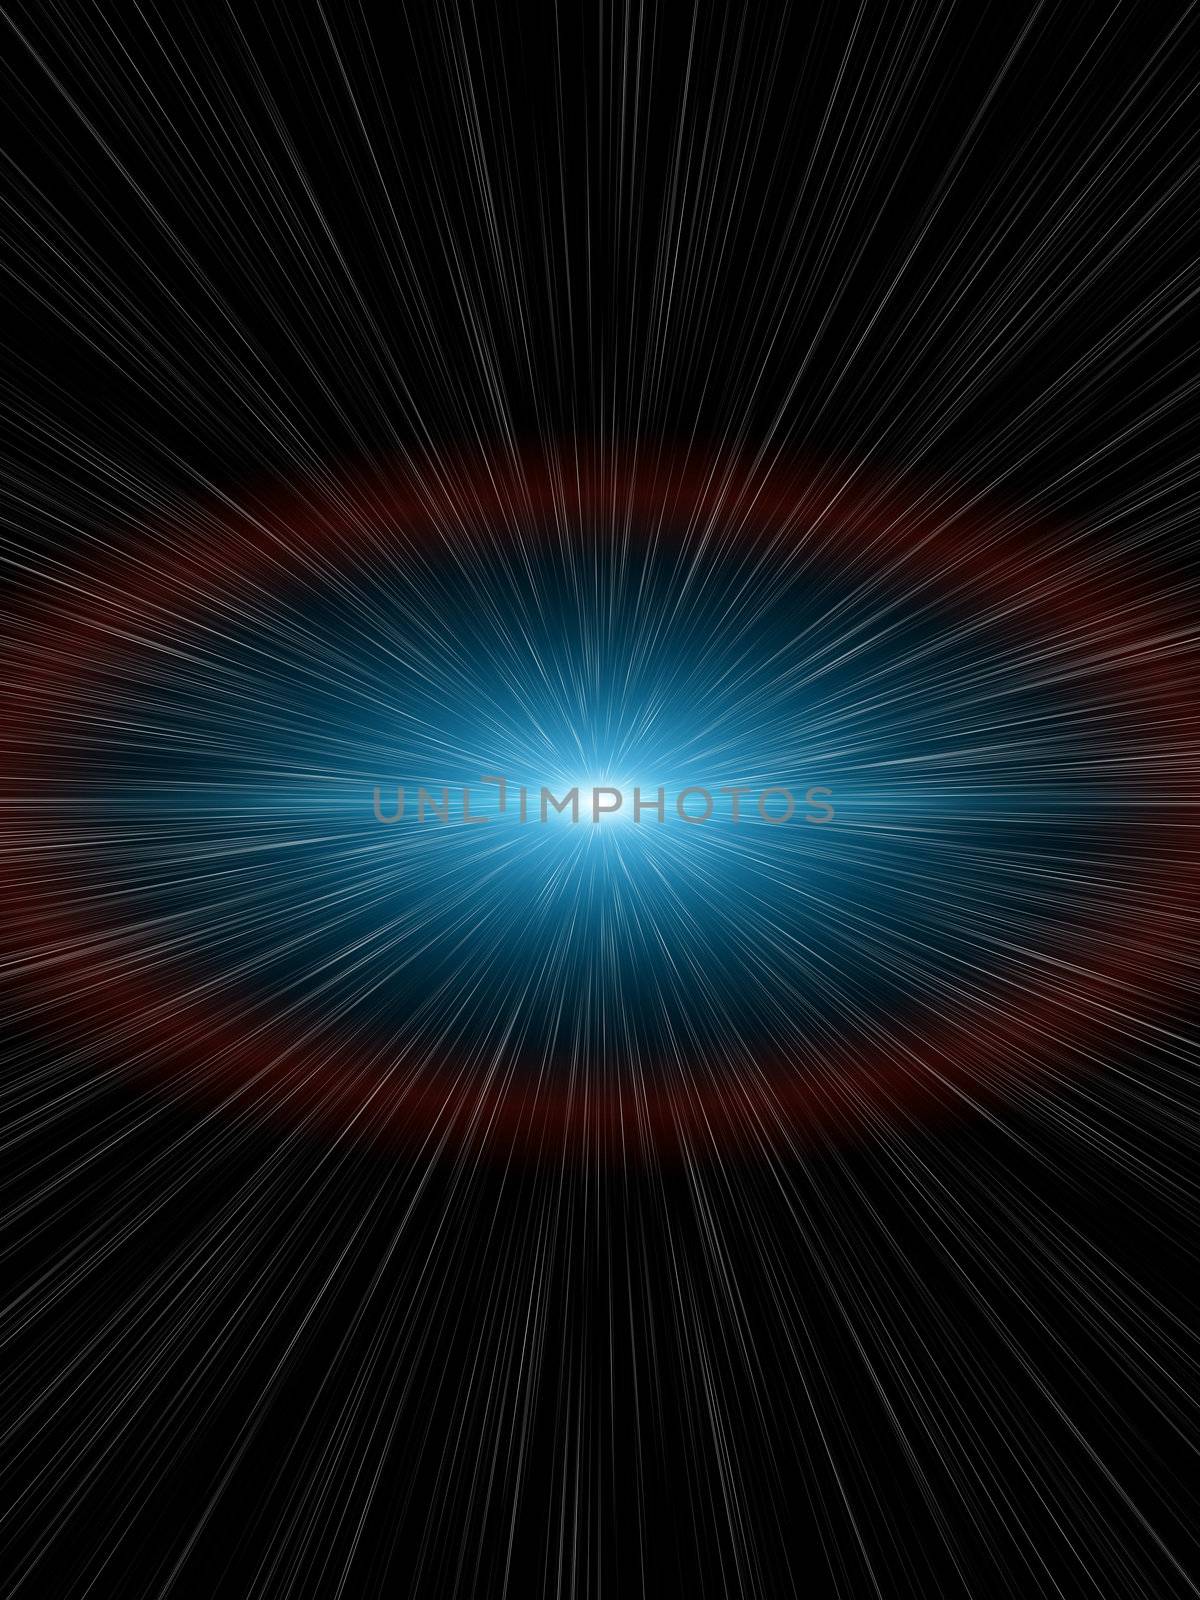 An illustration of a nice light speed background